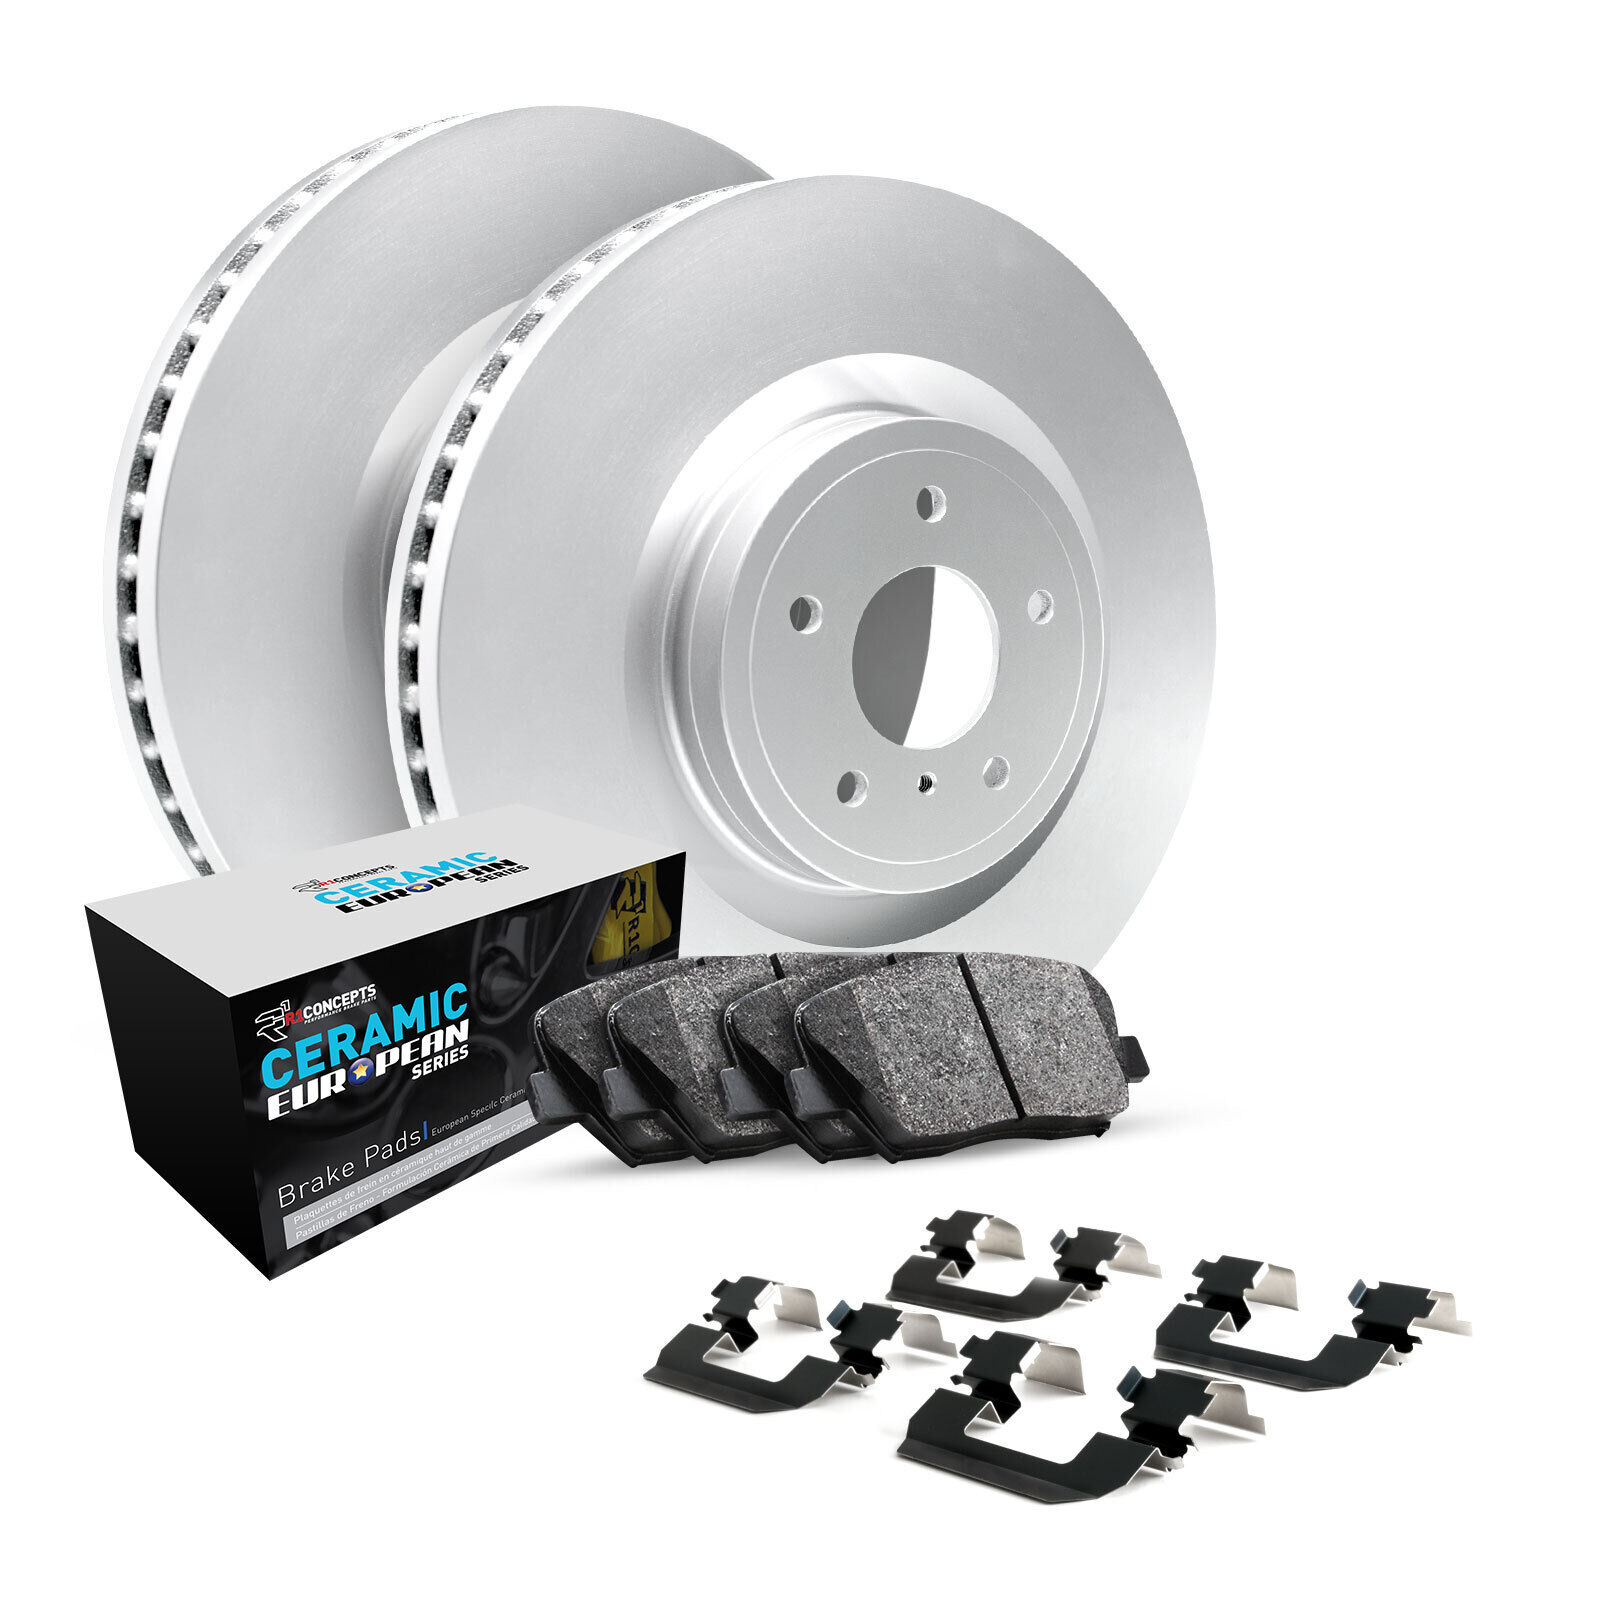 R1 Concepts Wdth1 31064 R1 Brake Rotors   Carbon Coated W  Euro Ceramic Pads